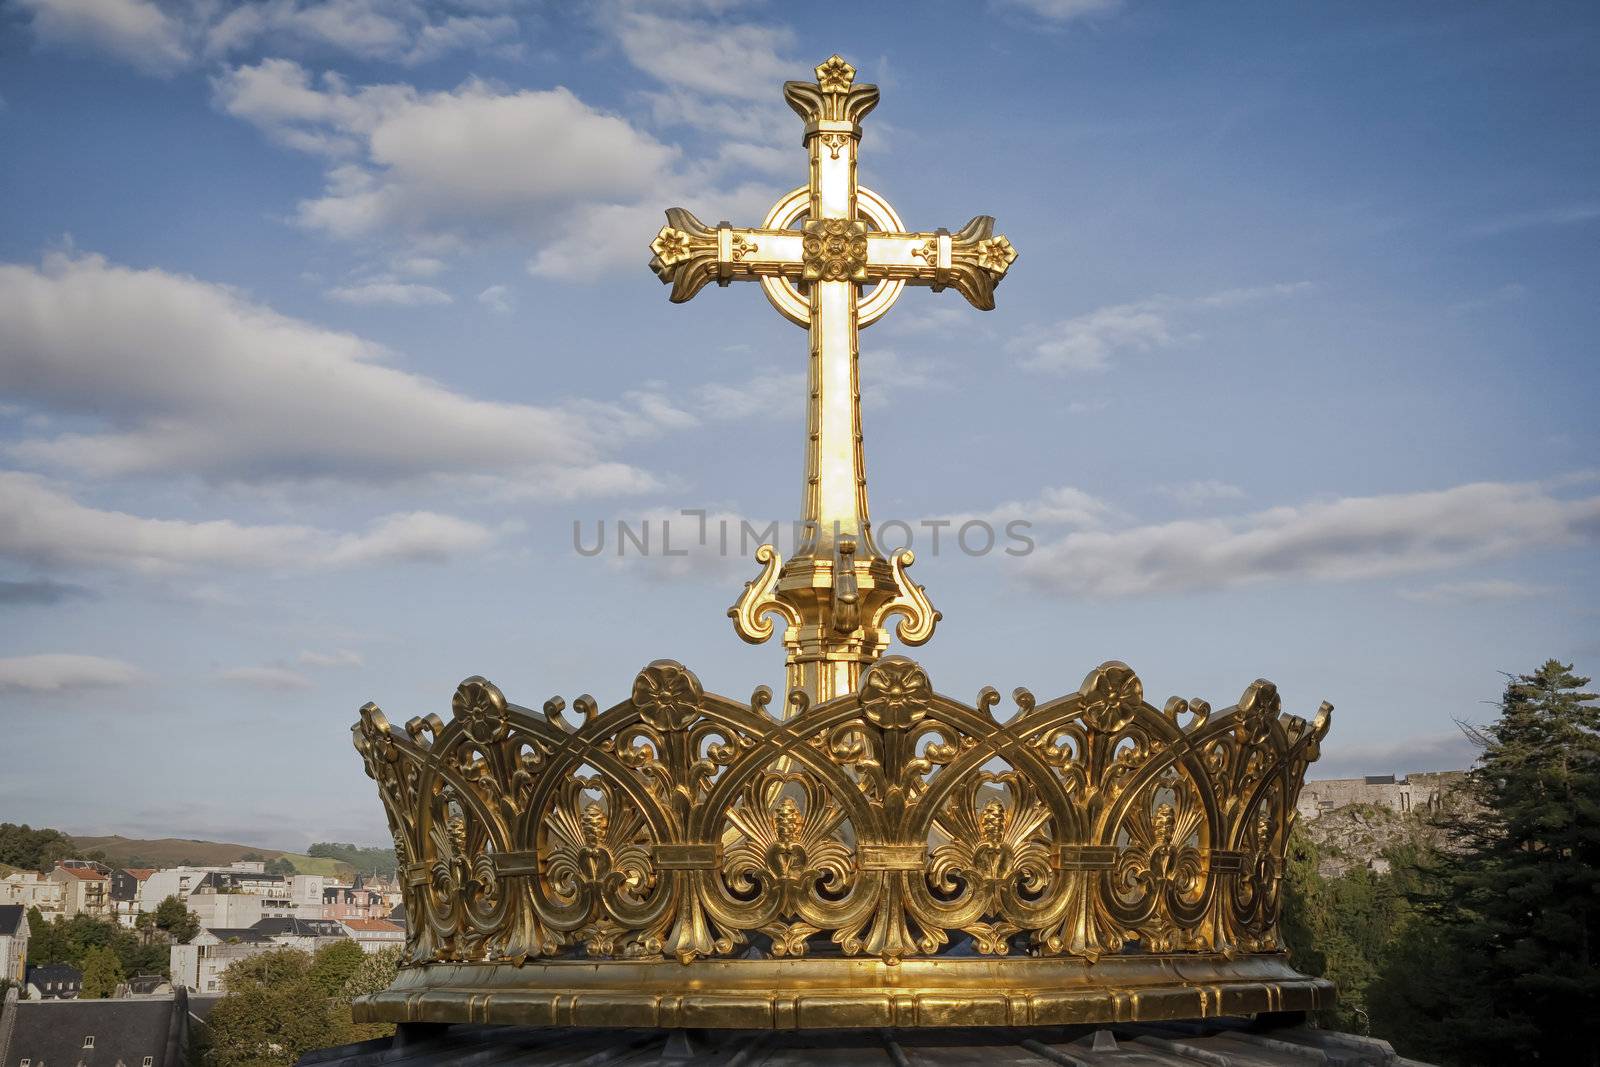 Gilded crown and cross of the dome of the Basilica of Our Lady of the Rosary of Lourdes, France. The crown symbolises the power and glory of God and is donated by Irish pilgrims many years ago.
